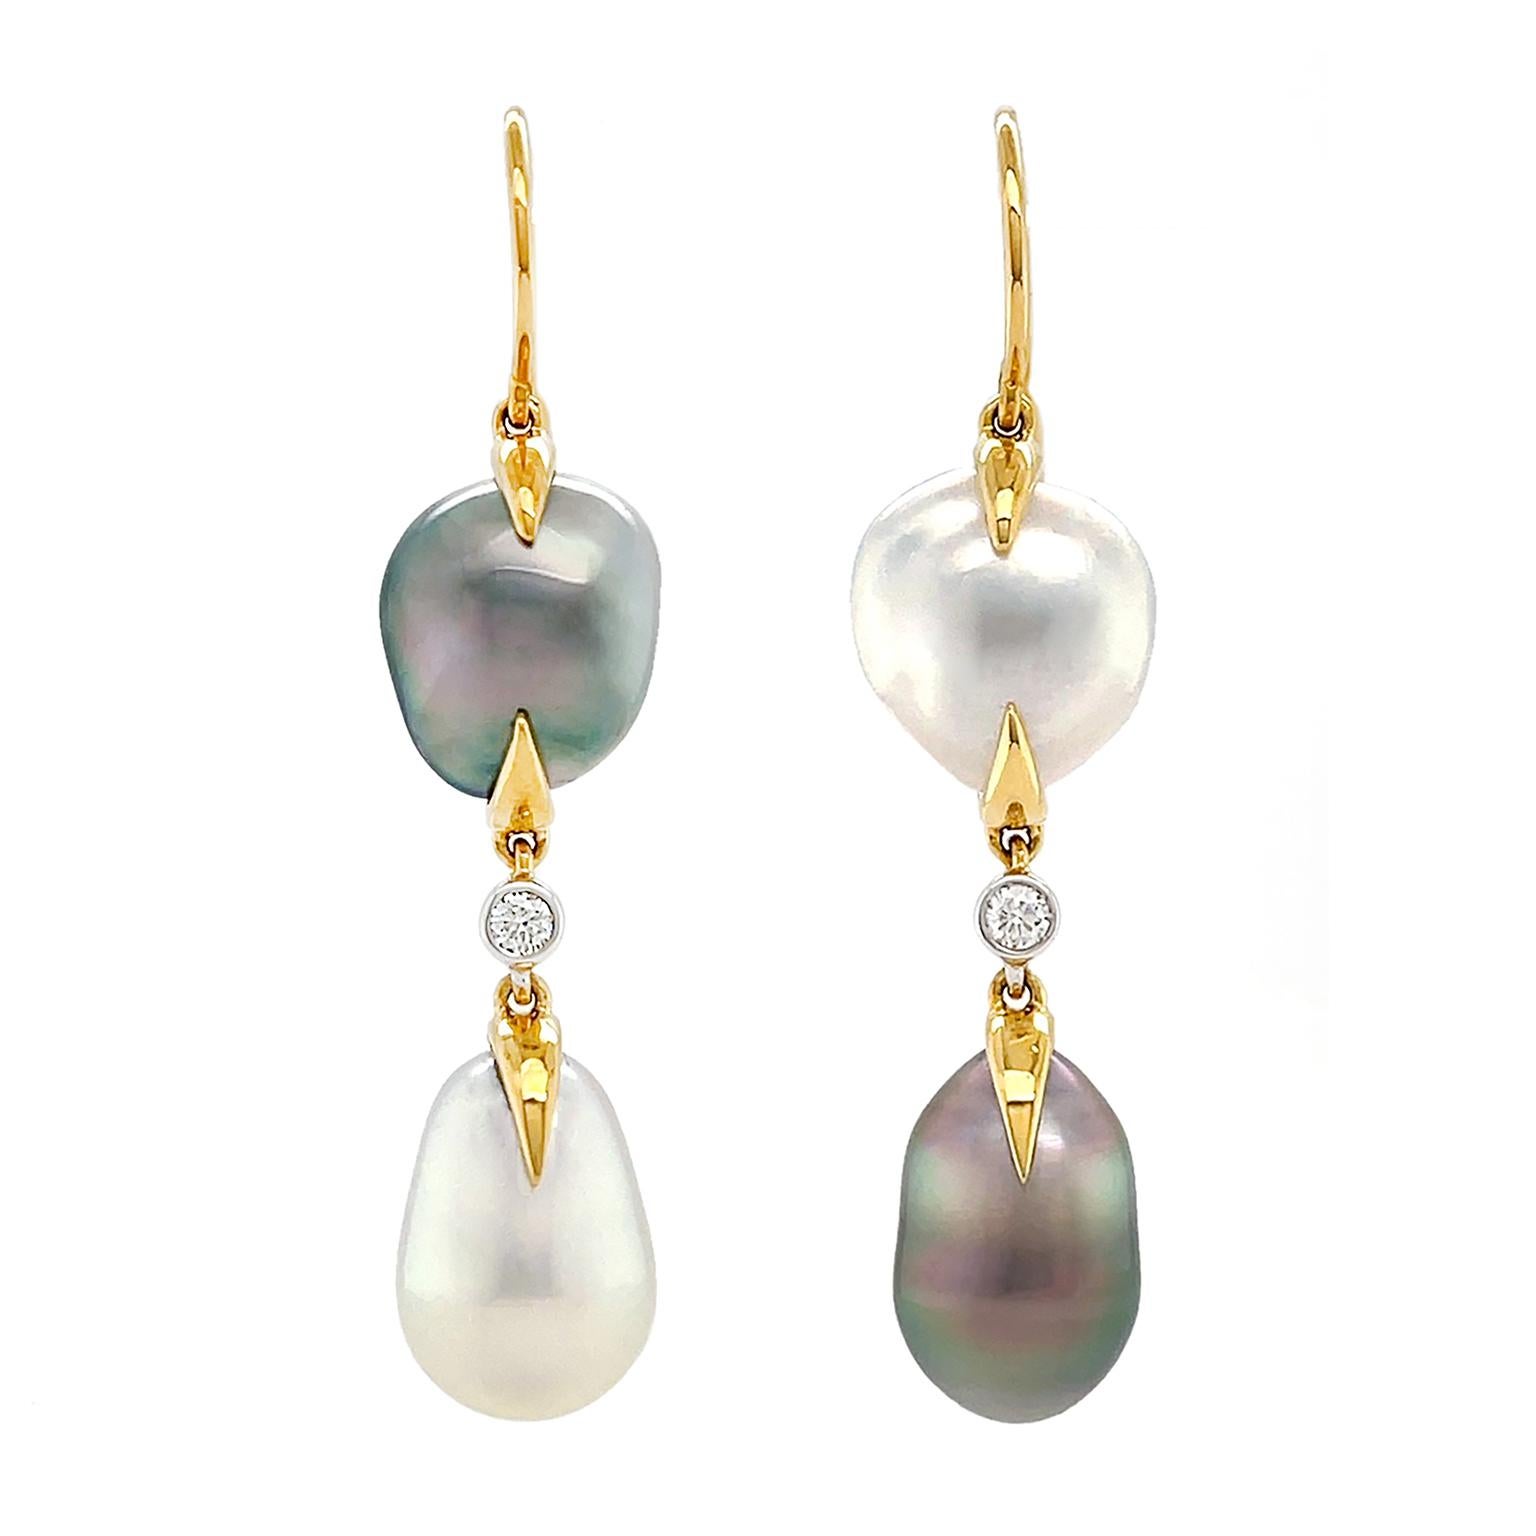 Using cool toned baroque keshi pearls, these earrings have 18k yellow gold hooks holding a round shaped pearl and elongated pearl with a brilliant set diamond in between. One earring has a white pearl on top and Tahitian keshi pearl at the bottom